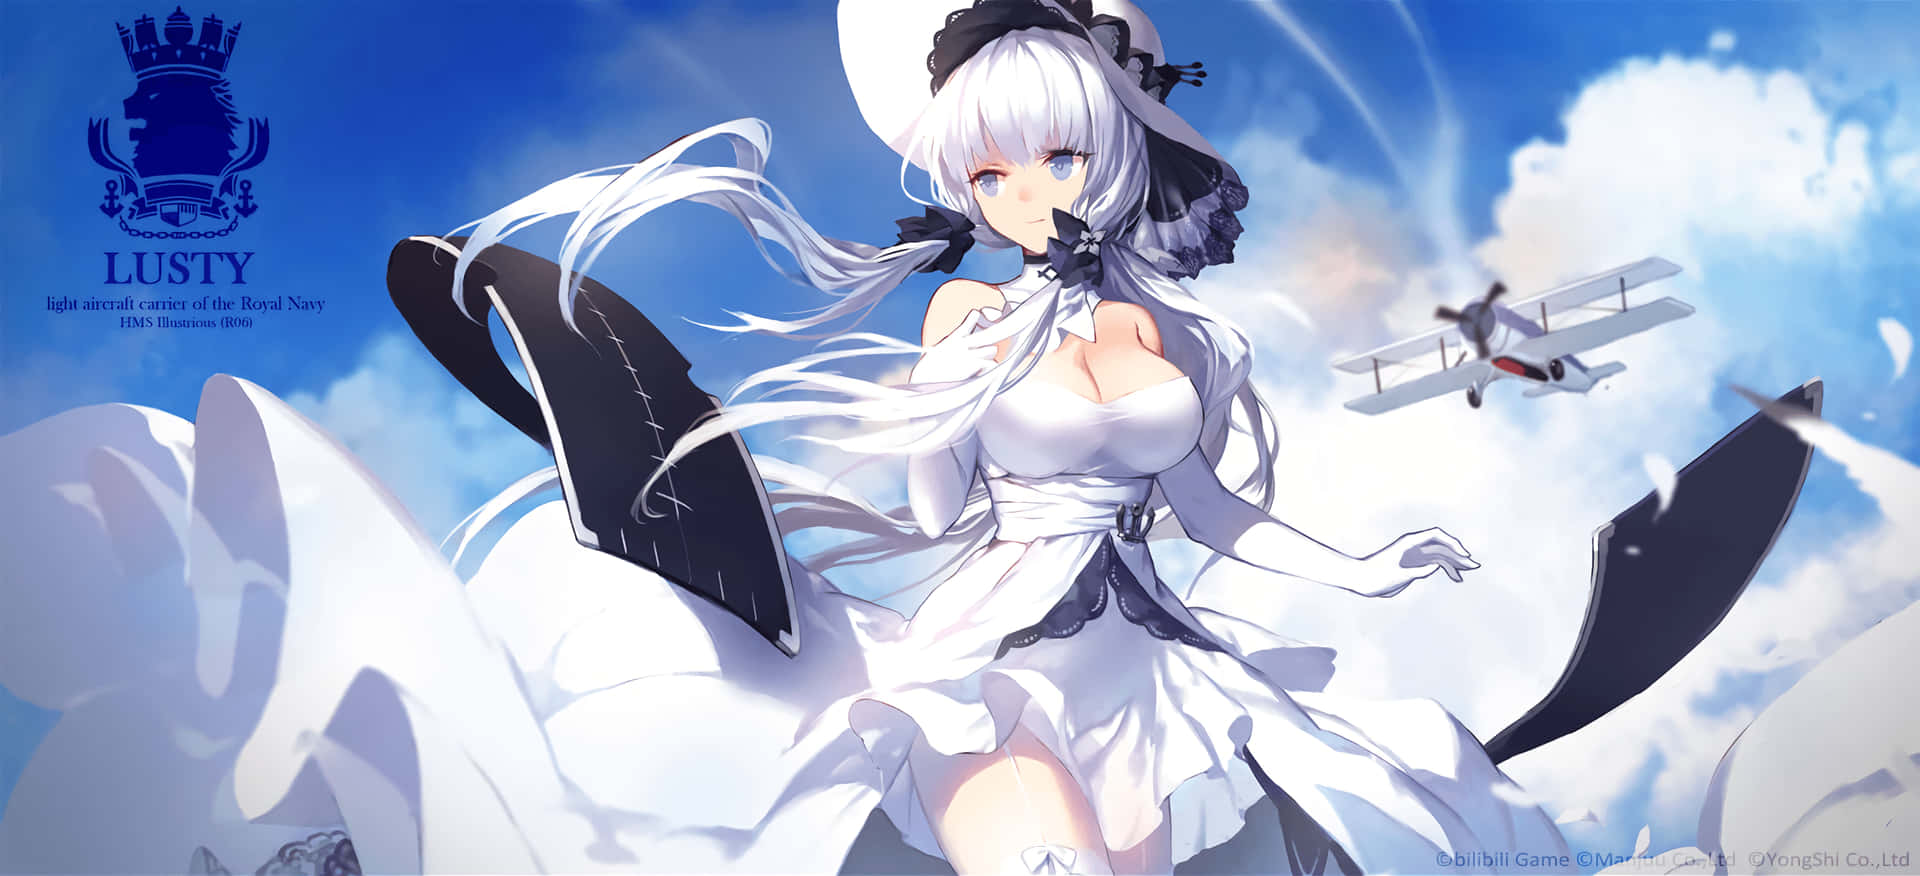 Sail into the depths of adventure with Azur Lane